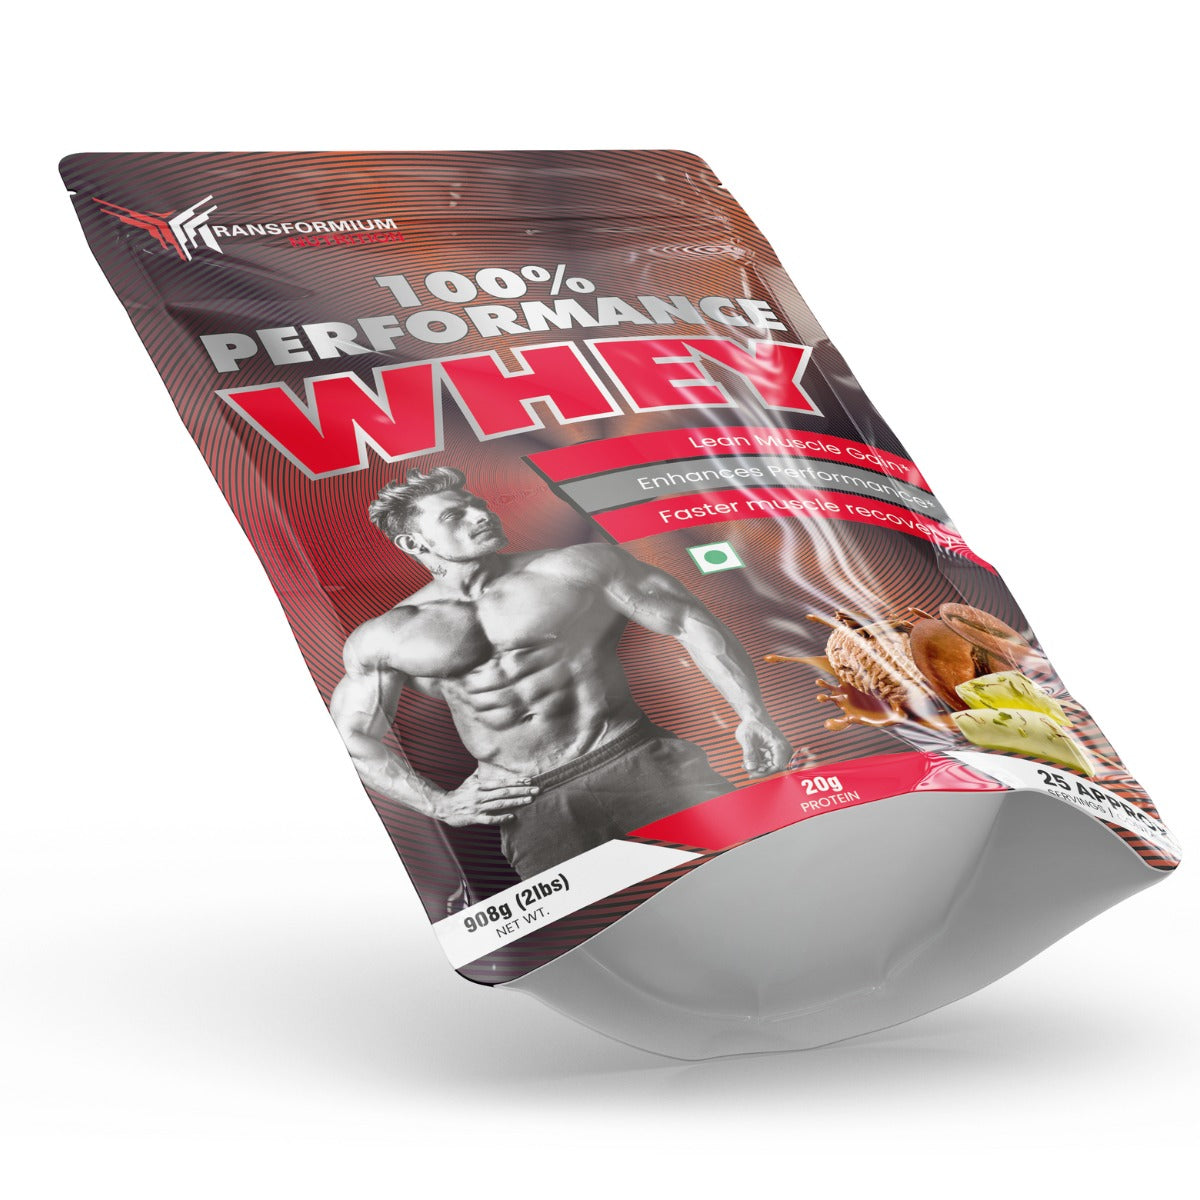 Performance Whey (Whey Protein for Muscle Mass)